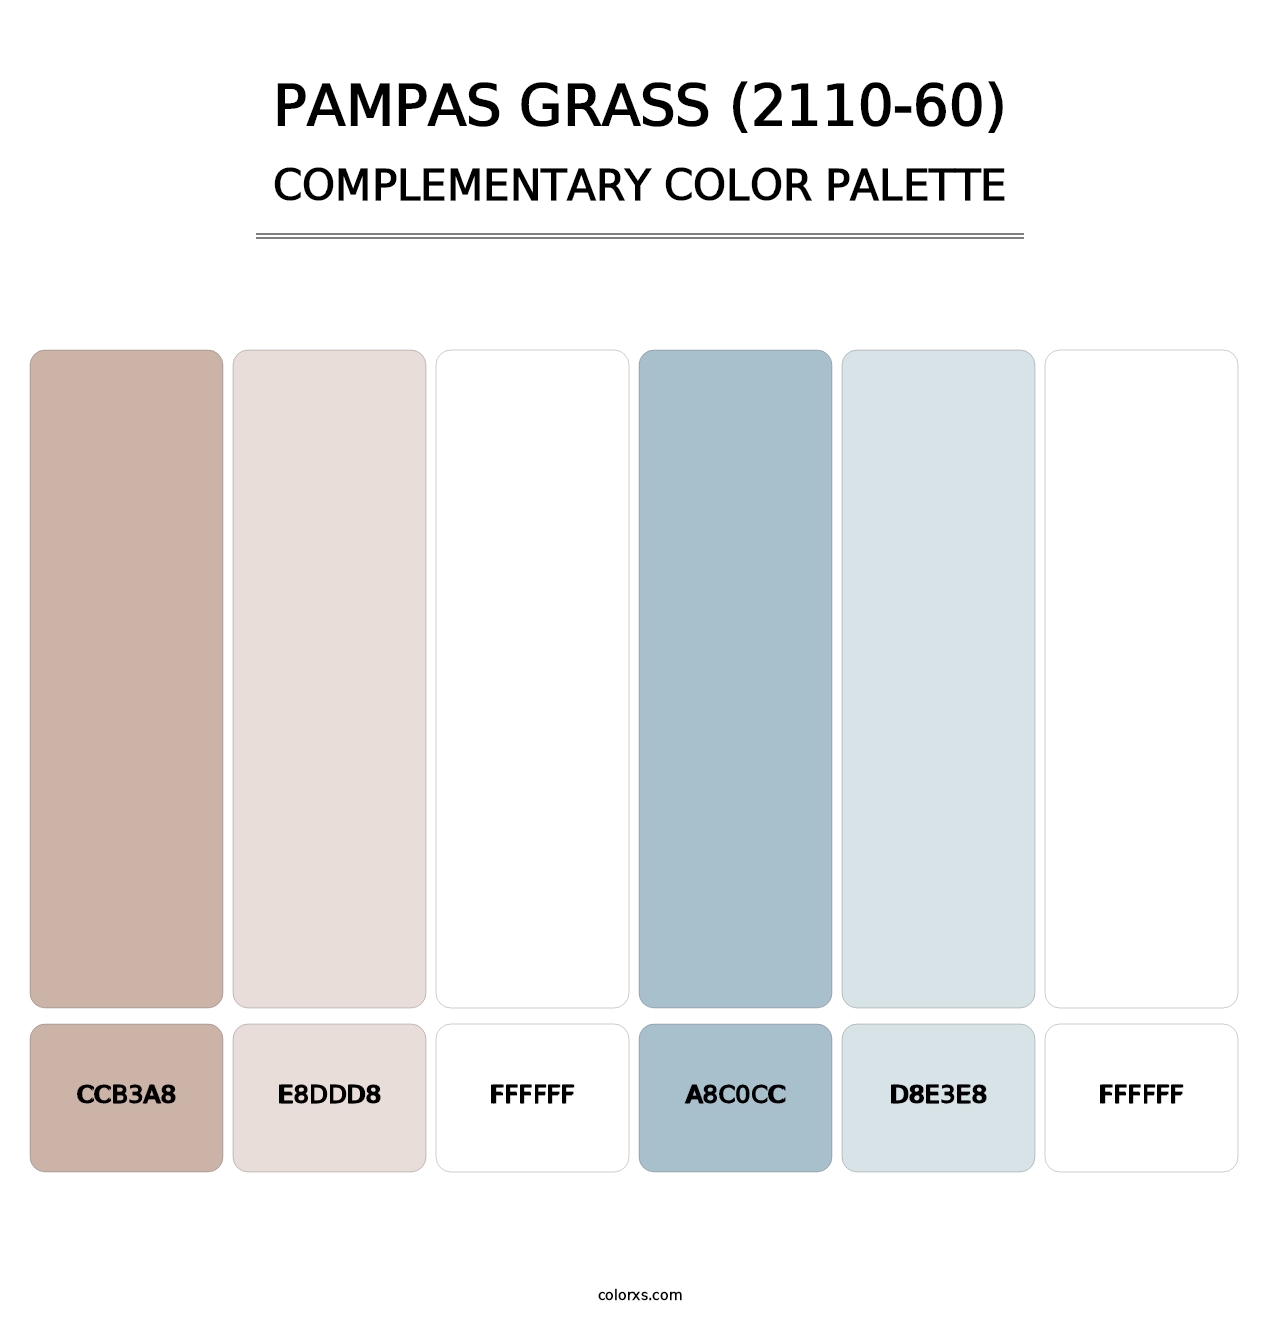 Pampas Grass (2110-60) - Complementary Color Palette